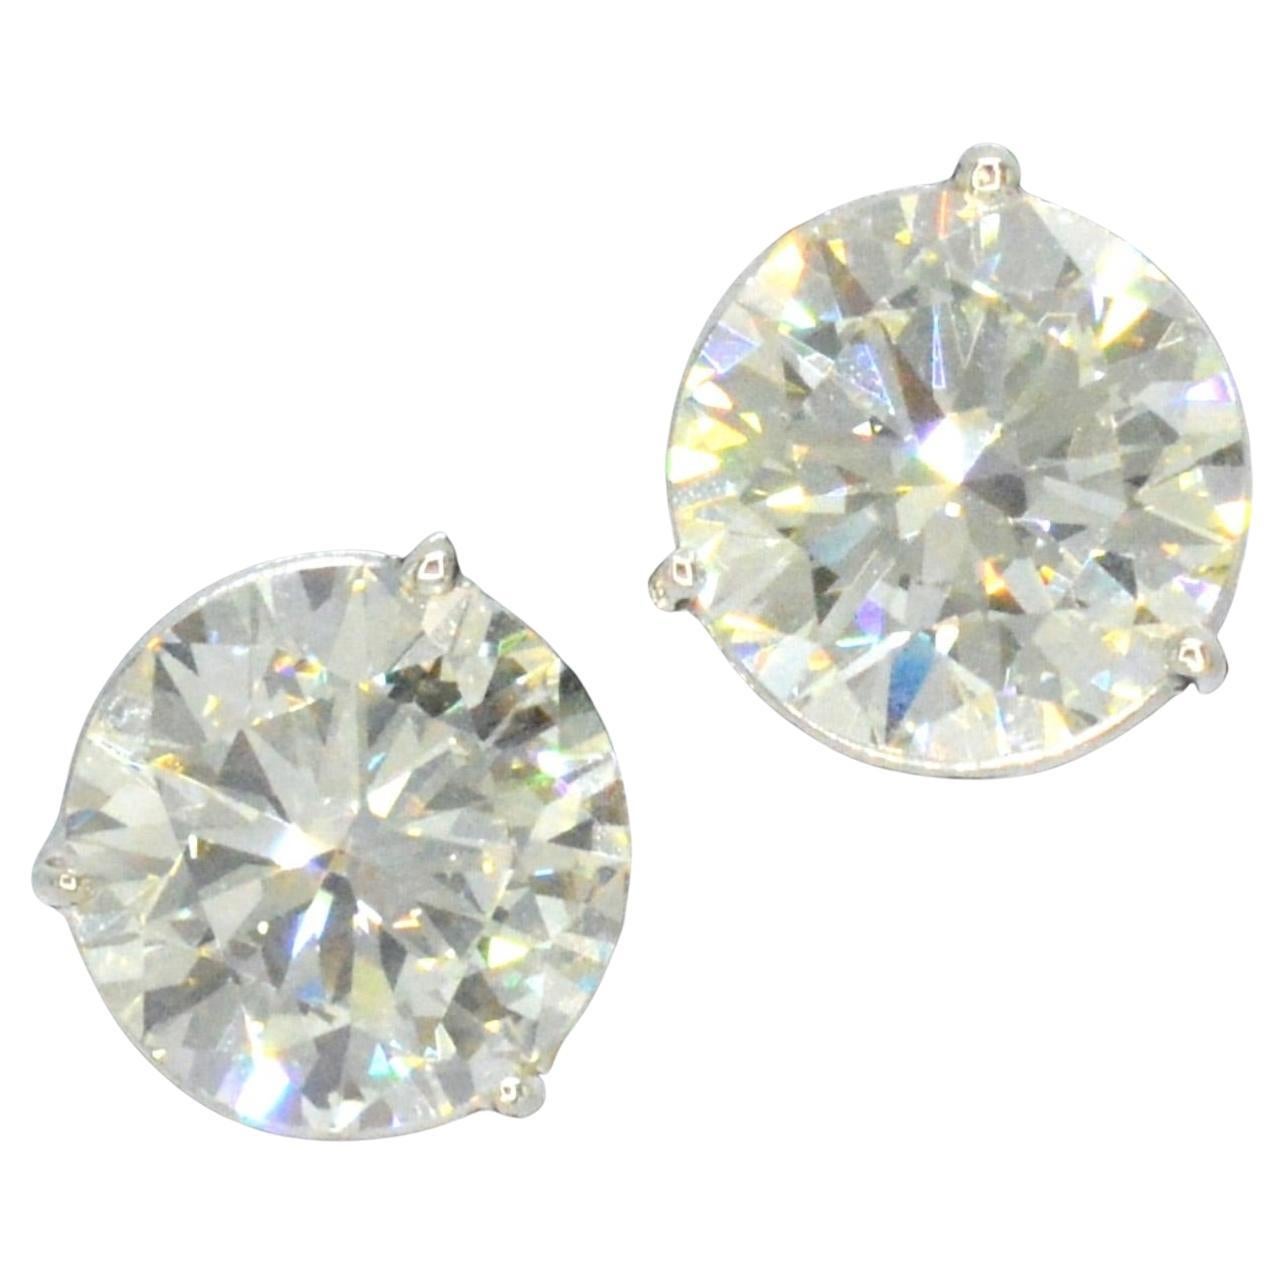 These exquisite stud earrings are a true statement piece. Each earring features a brilliant cut diamond weighing 5.00 carats, for a total of 10.00 carats. The diamonds have a warm tint with a K-L color grade and a VS clarity grade, and the grinding